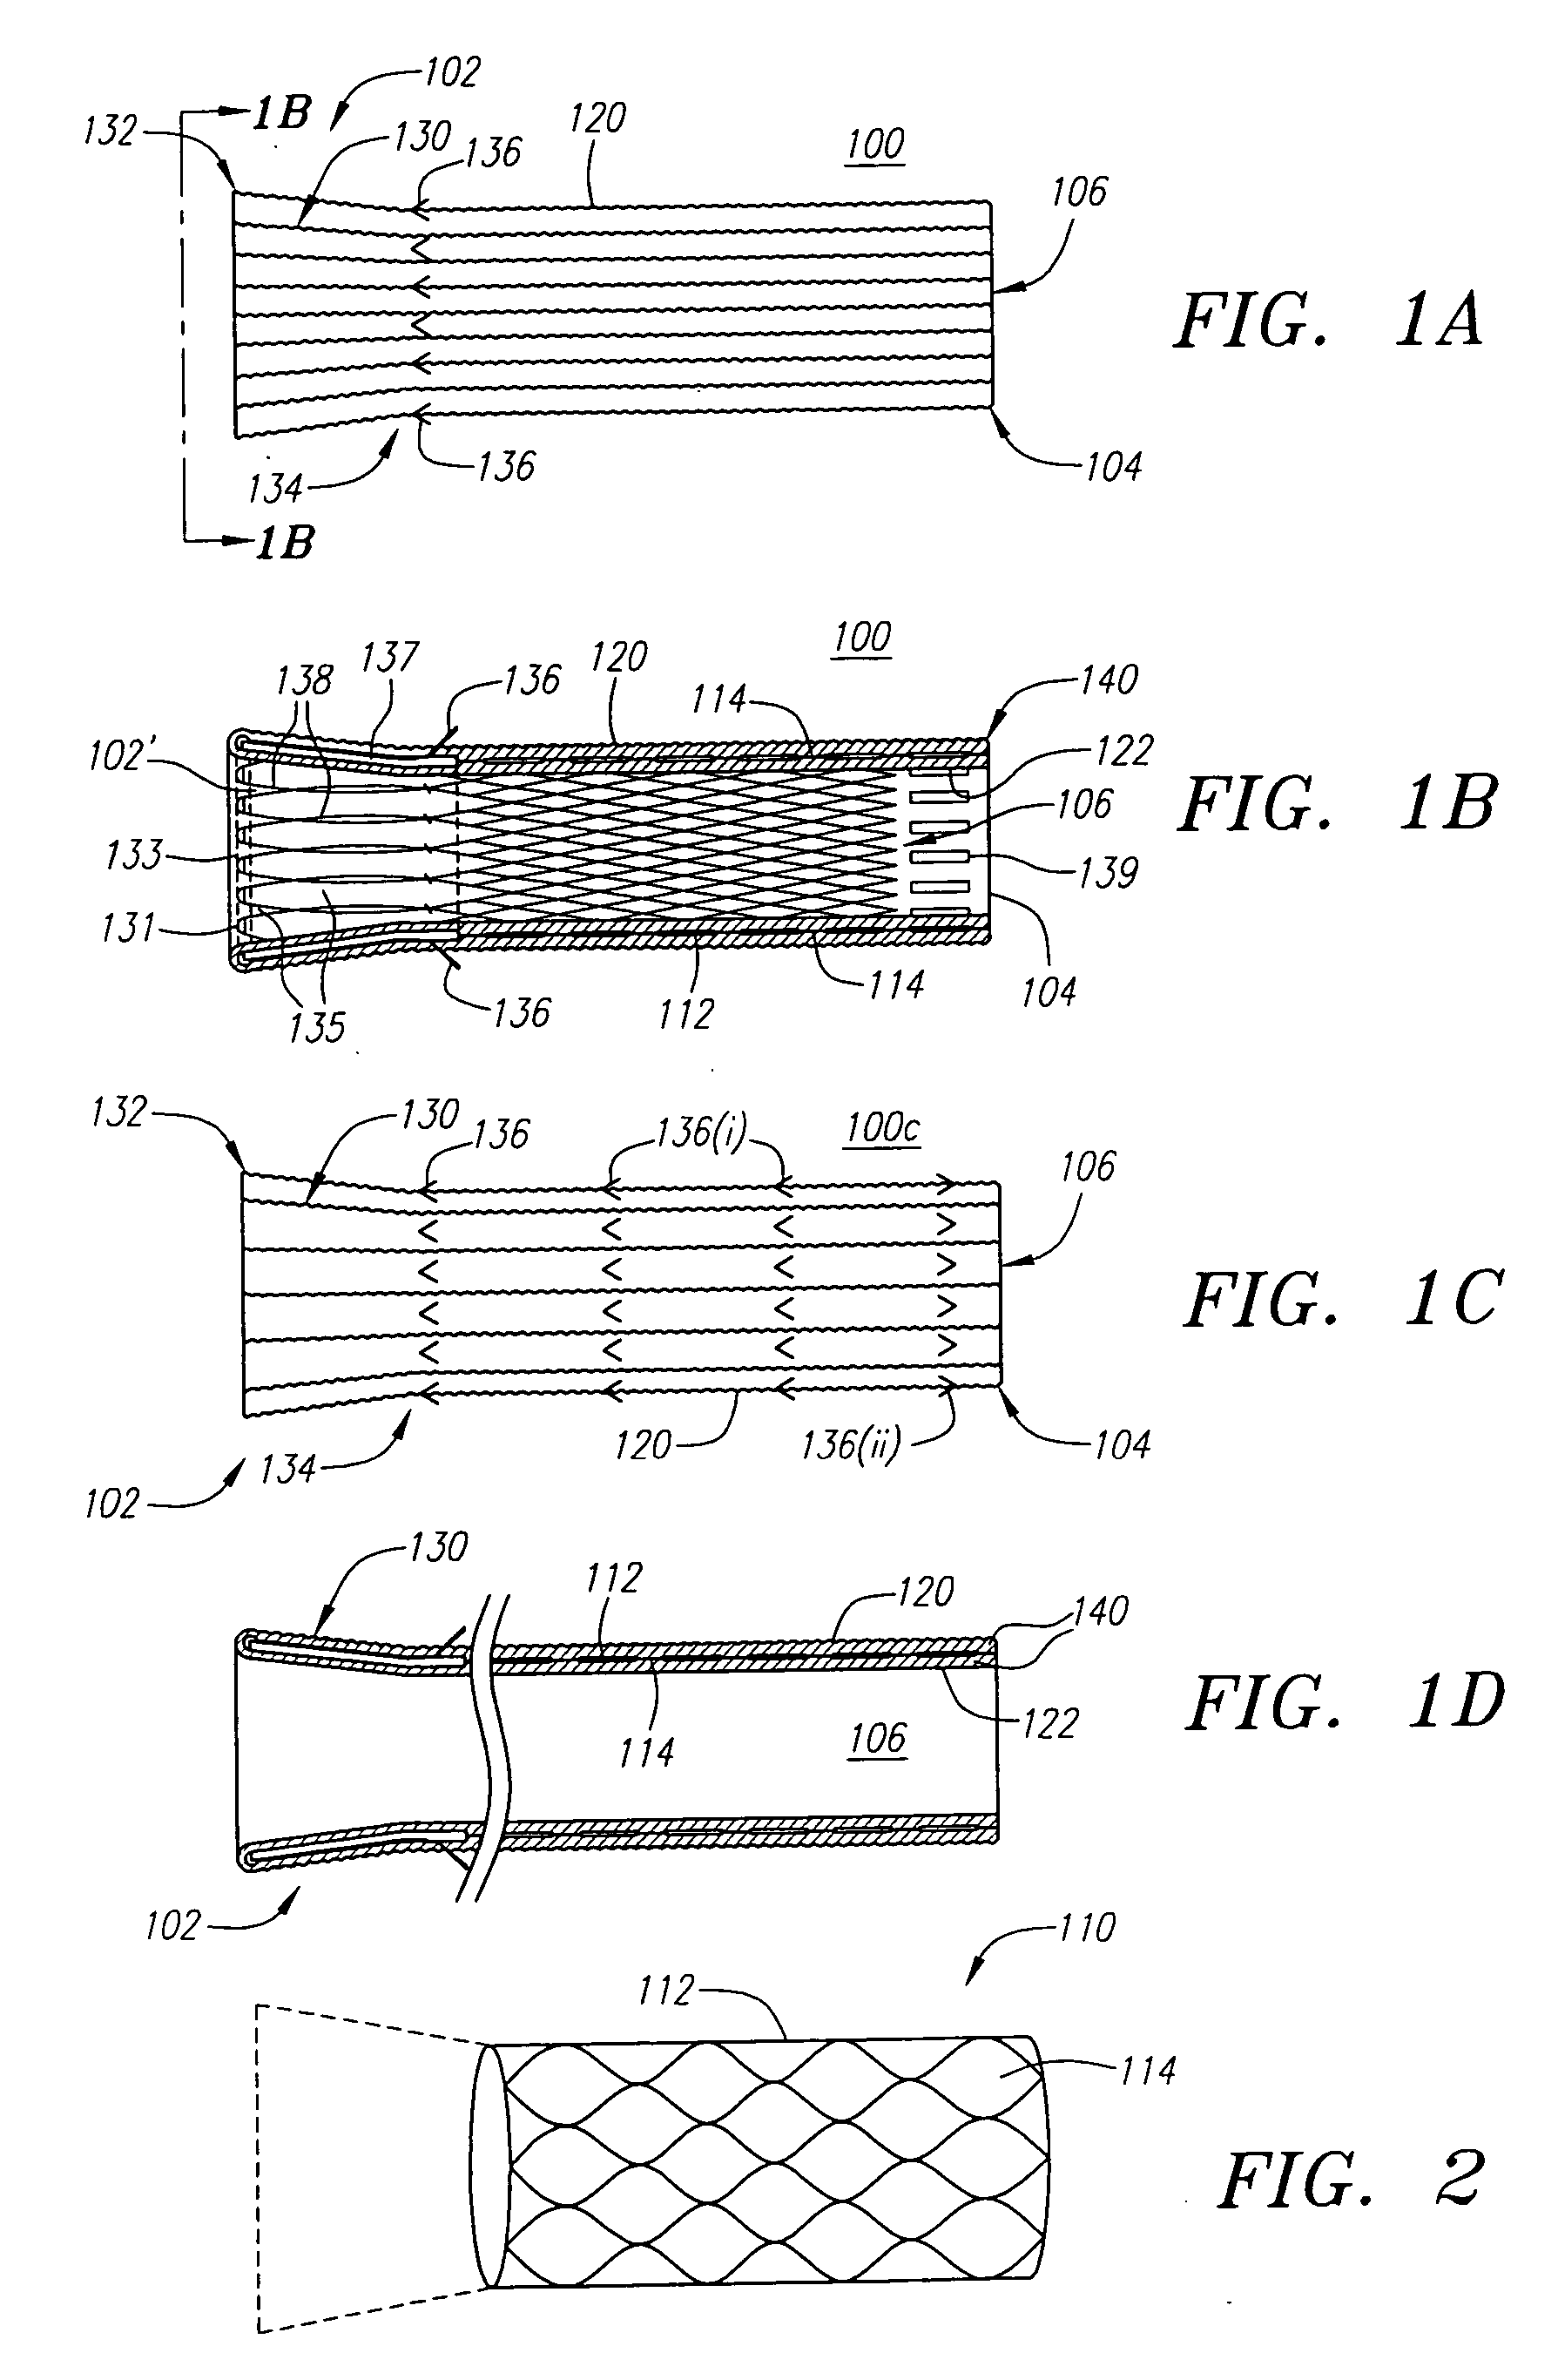 Methods for forming and fabricating textured and drug eluting coronary artery stent